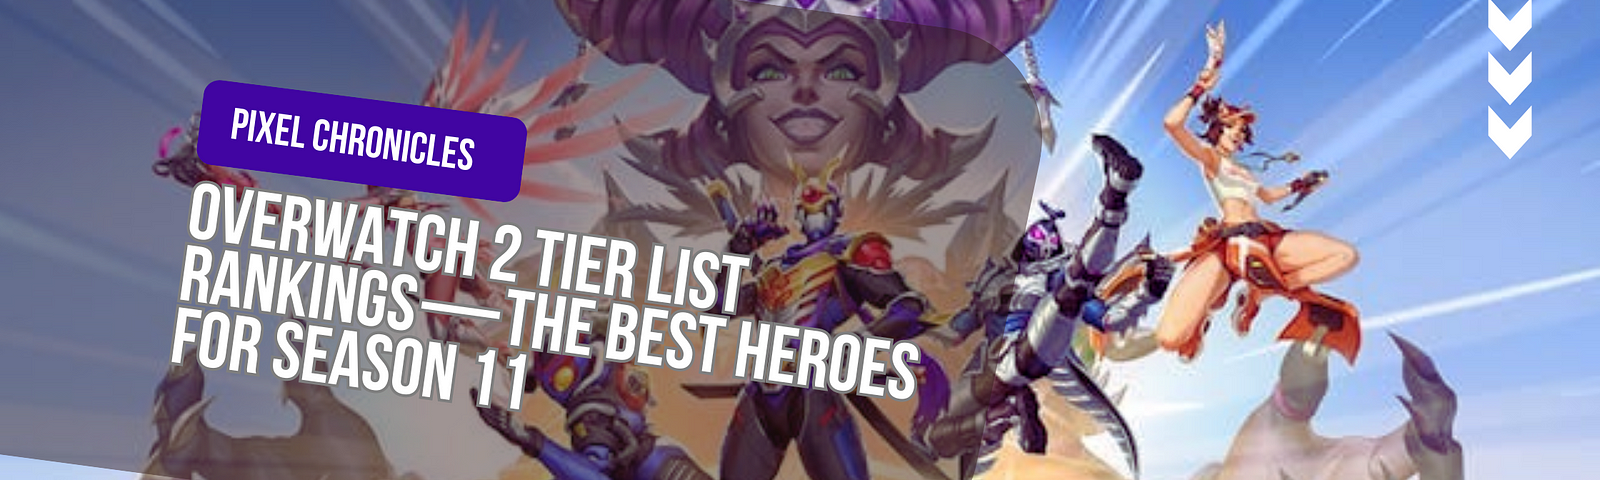 Overwatch 2 Tier List Rankings for Season 11 showing the best heroes in Damage, Tank, and Support categories